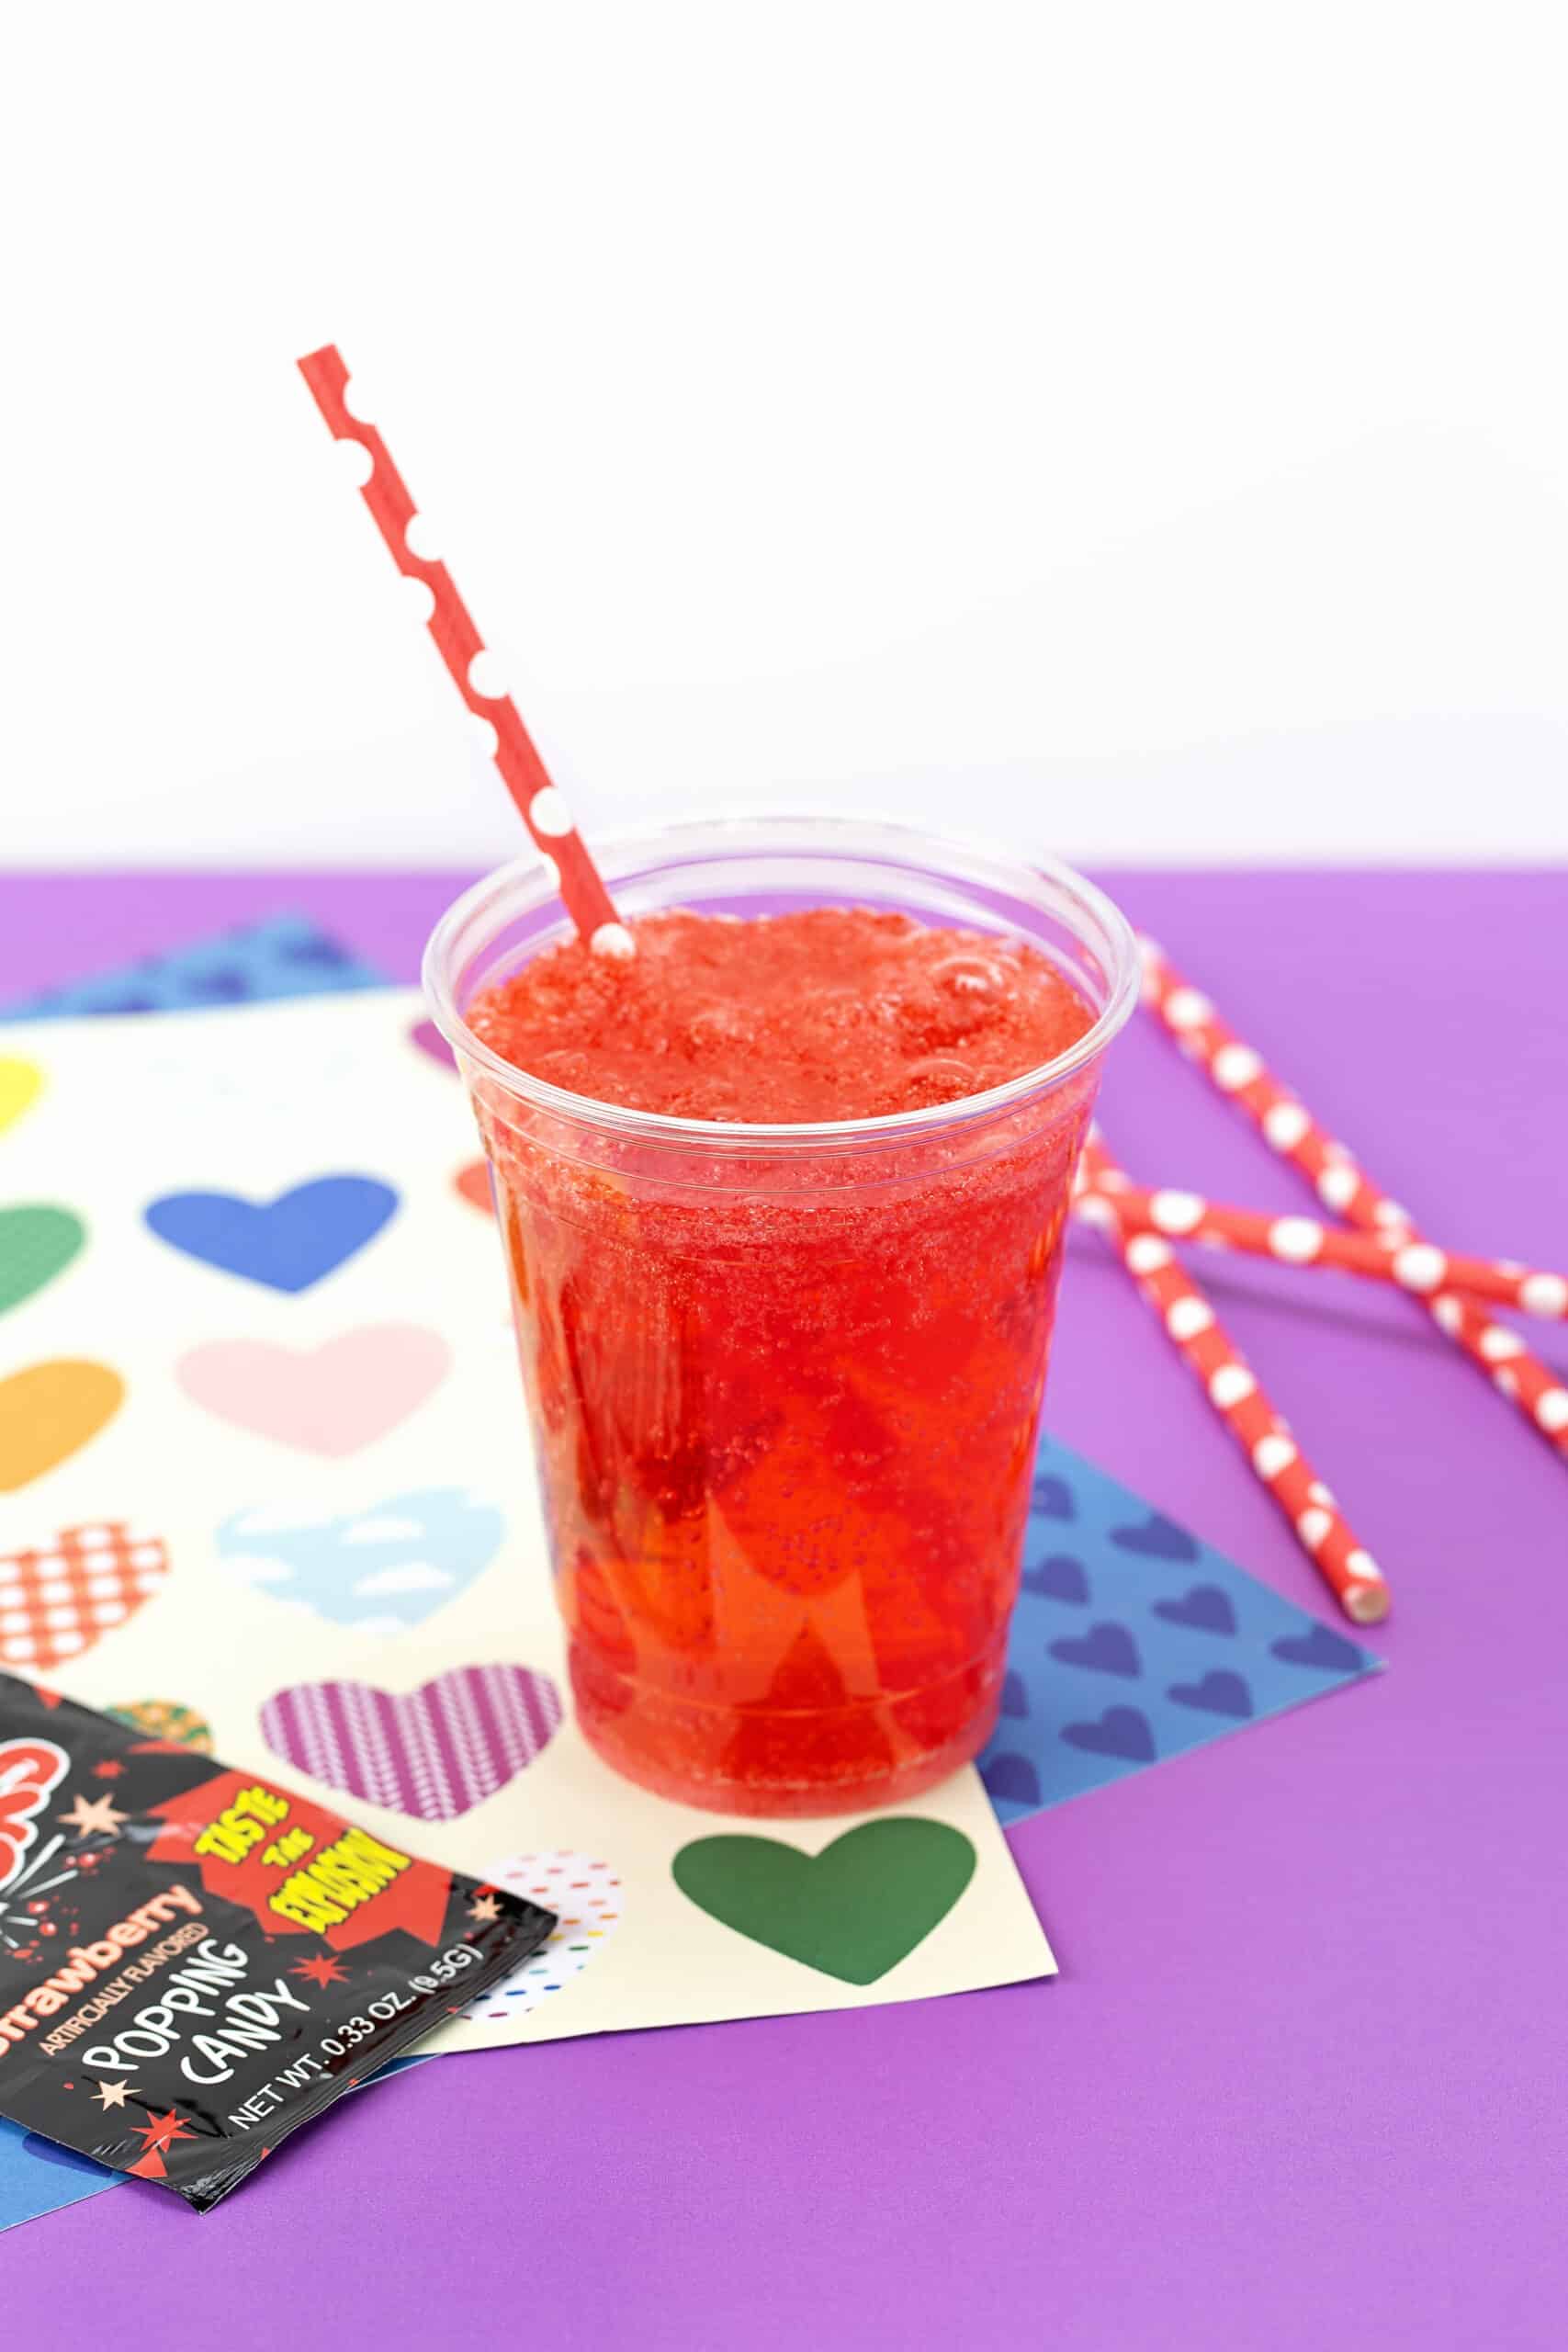 This no mess, four ingredient Poppin' Love Potion drink recipe is one of the best Valentine’s Day activities for kids! Watch this magic potion drink fizz and bubble when you add the secret ingredients! Includes a step-by-step video tutorial for your classroom Valentine's Day party!